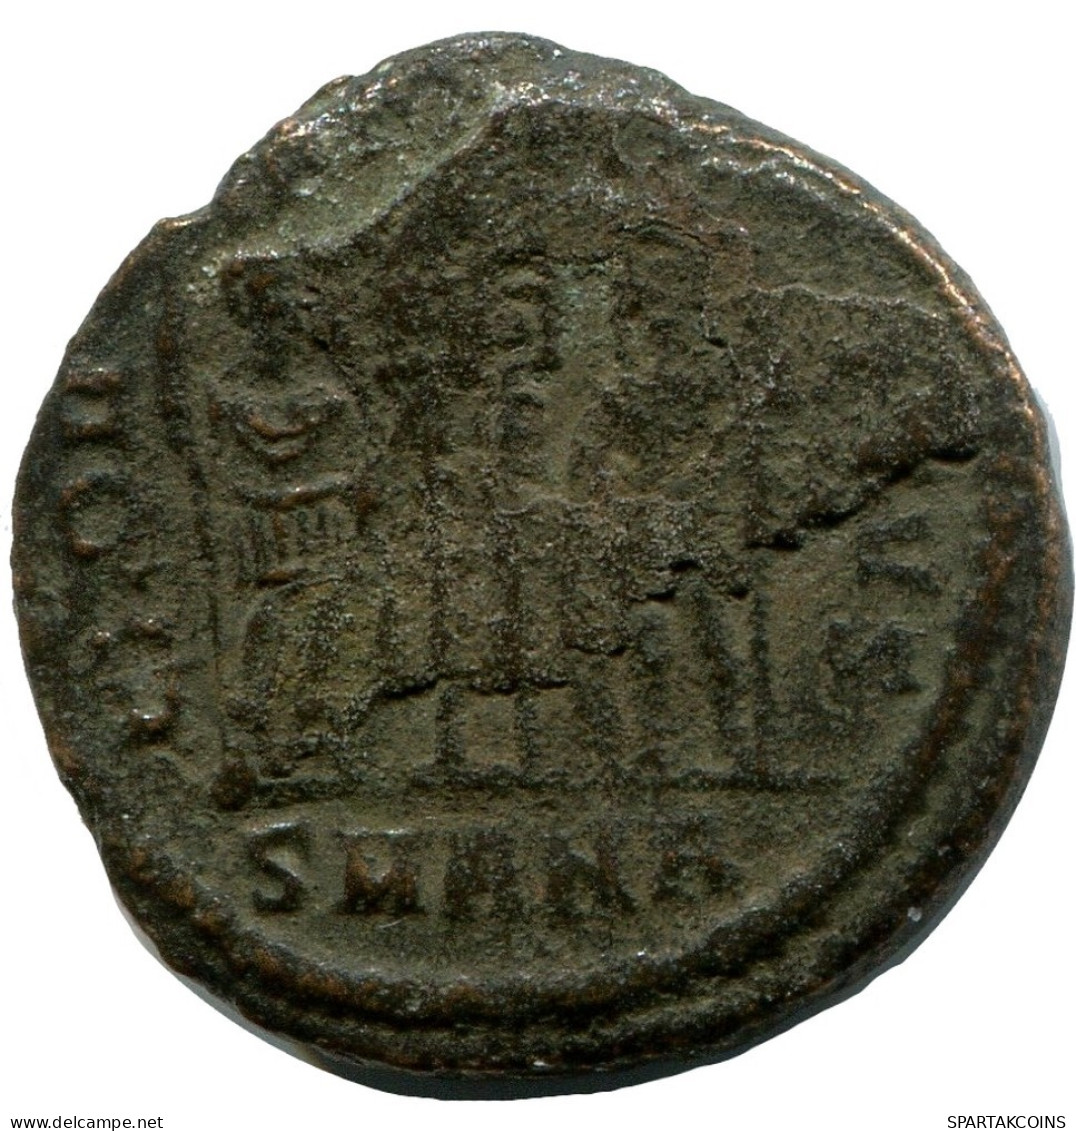 CONSTANTINE I MINTED IN ANTIOCH FOUND IN IHNASYAH HOARD EGYPT #ANC10626.14.F.A - El Impero Christiano (307 / 363)